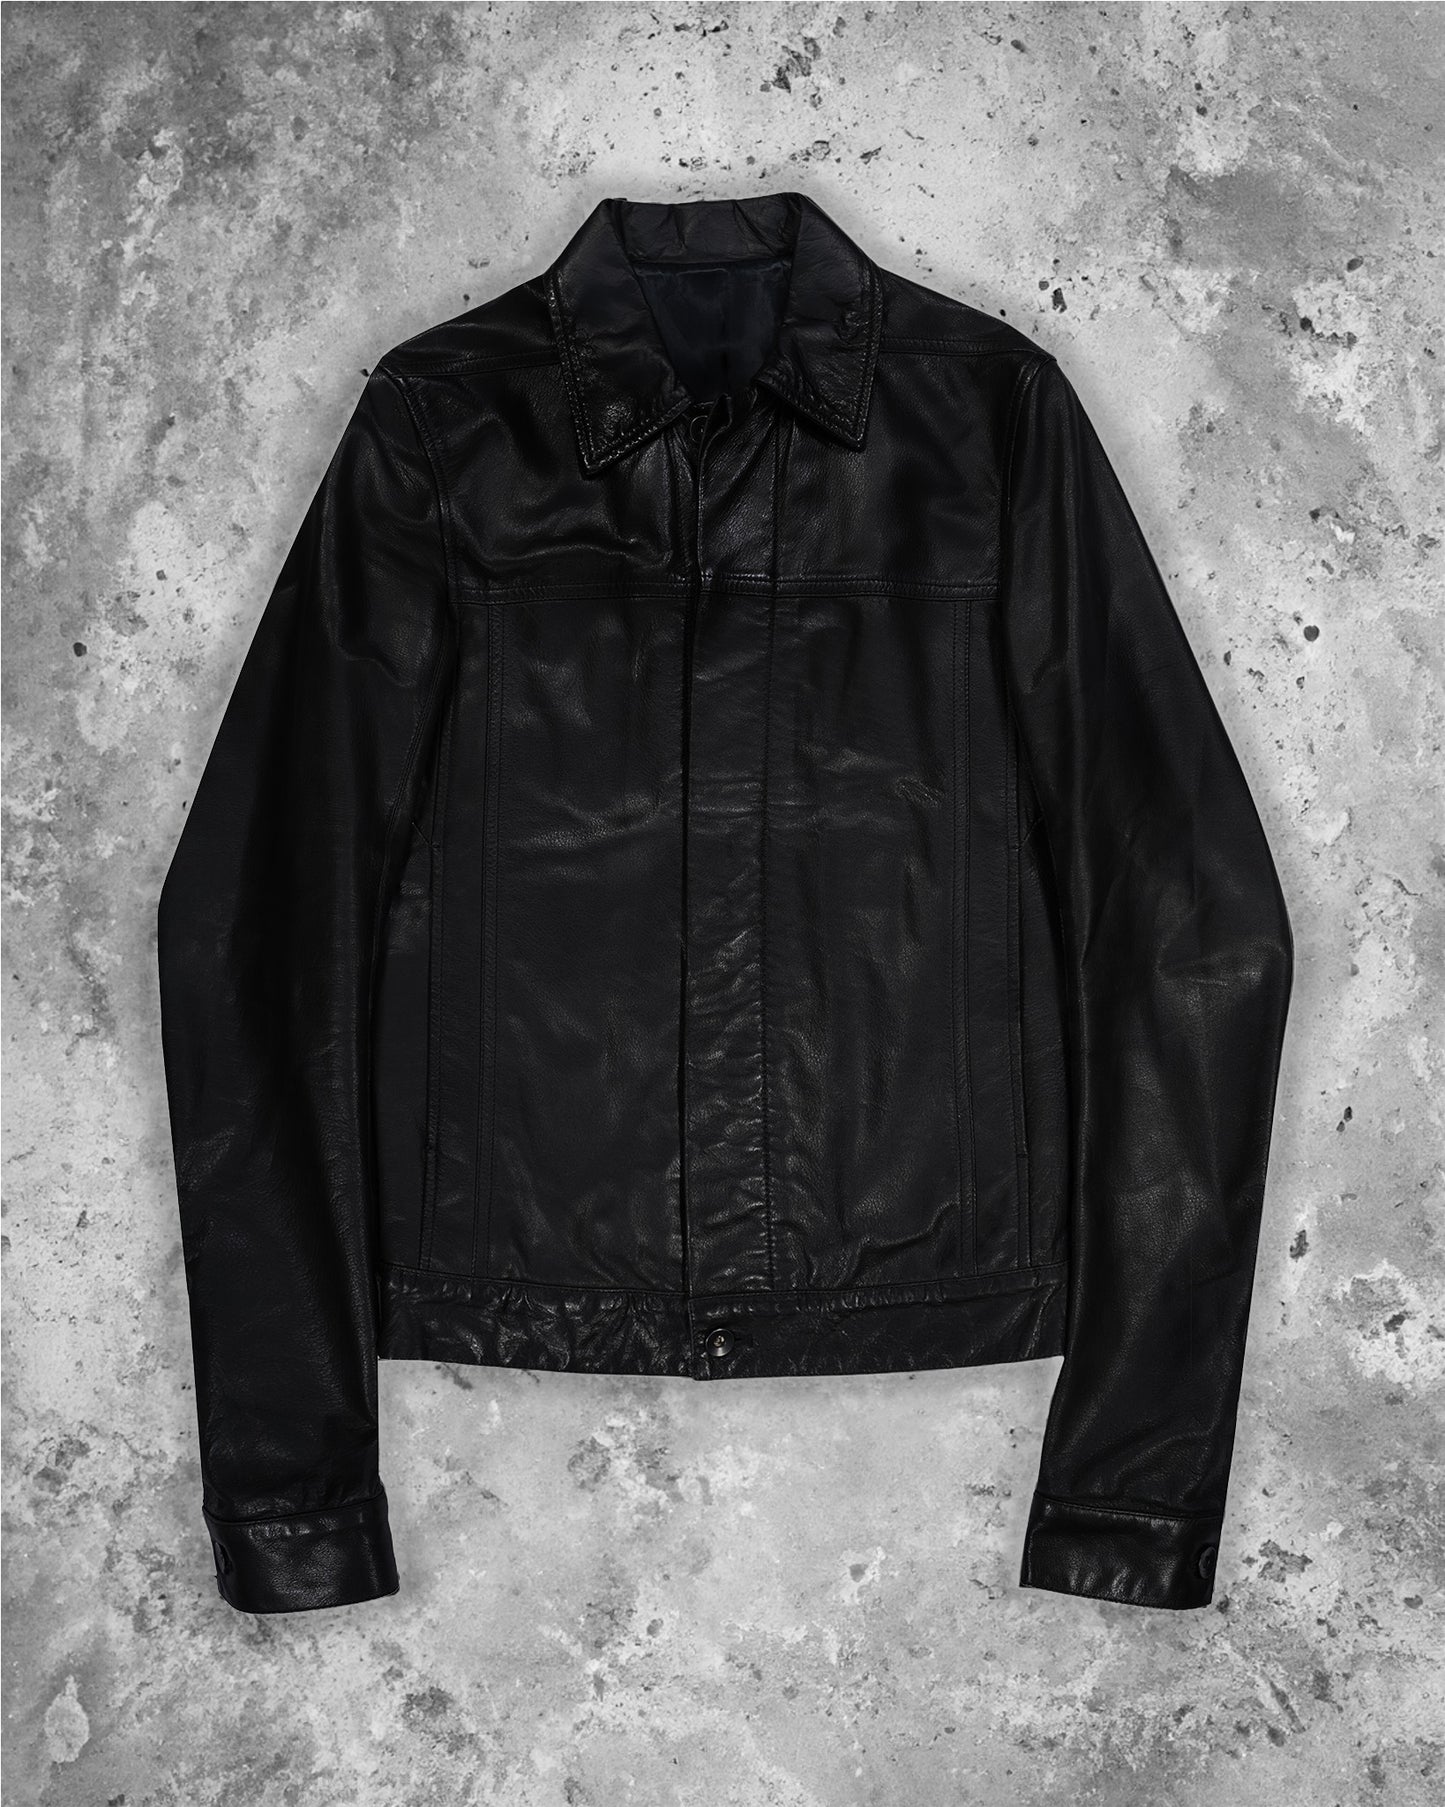 Rick Owens Cow Leather Worker Jacket - SS08 “Creatch”